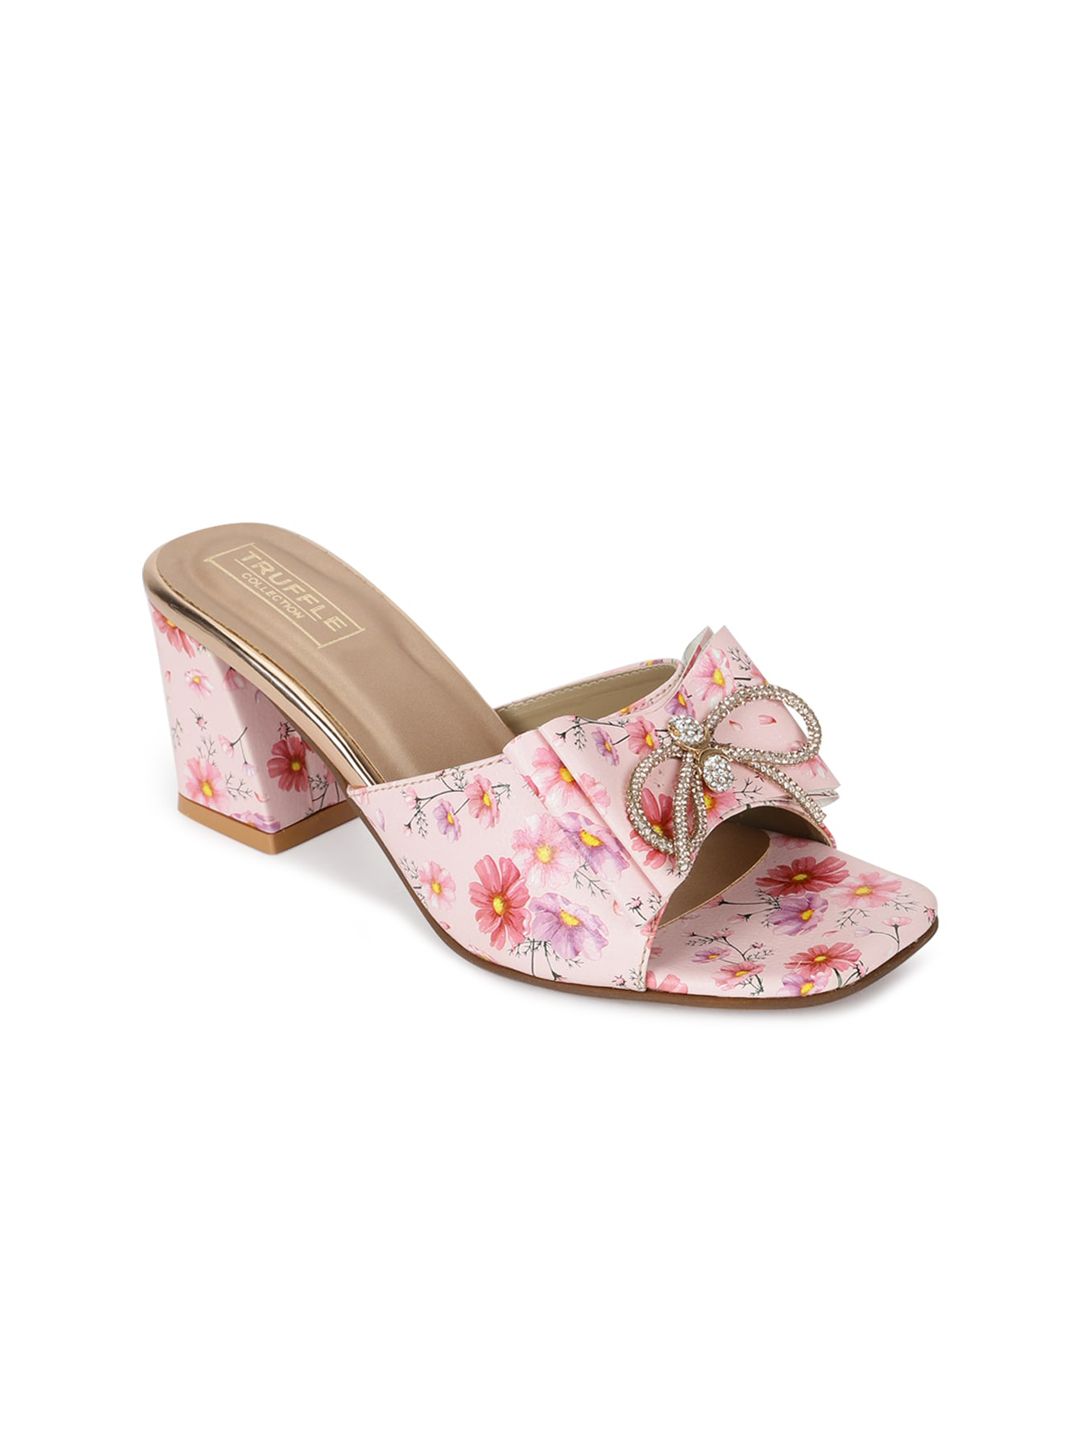 Truffle Collection Pink Printed PU Block Heels Price in India